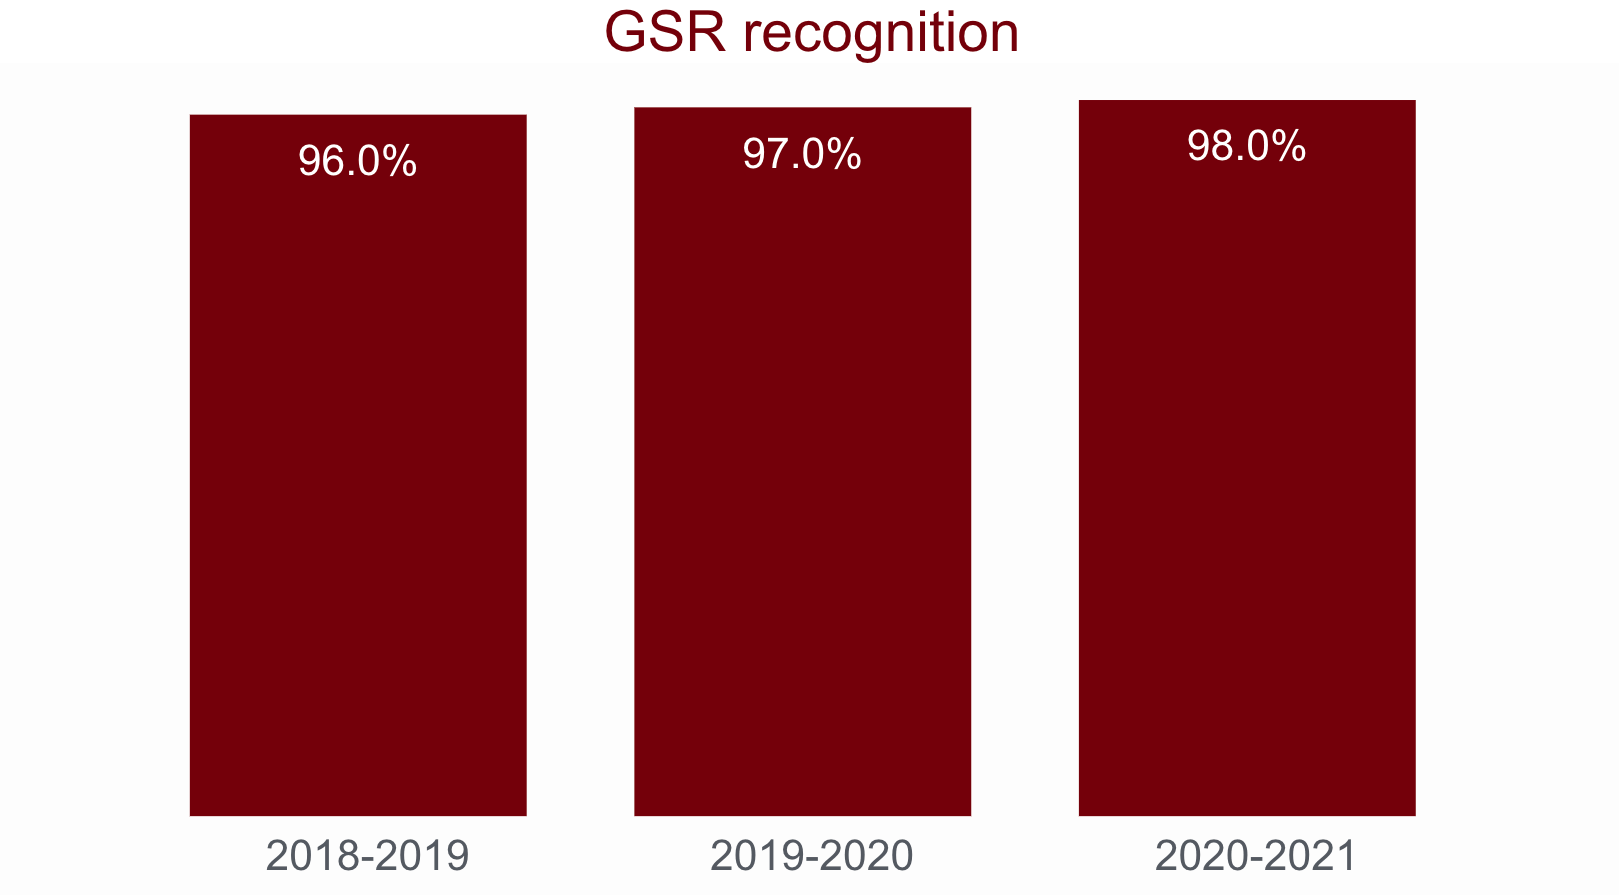 Bar chart showing G.S.R. recognition